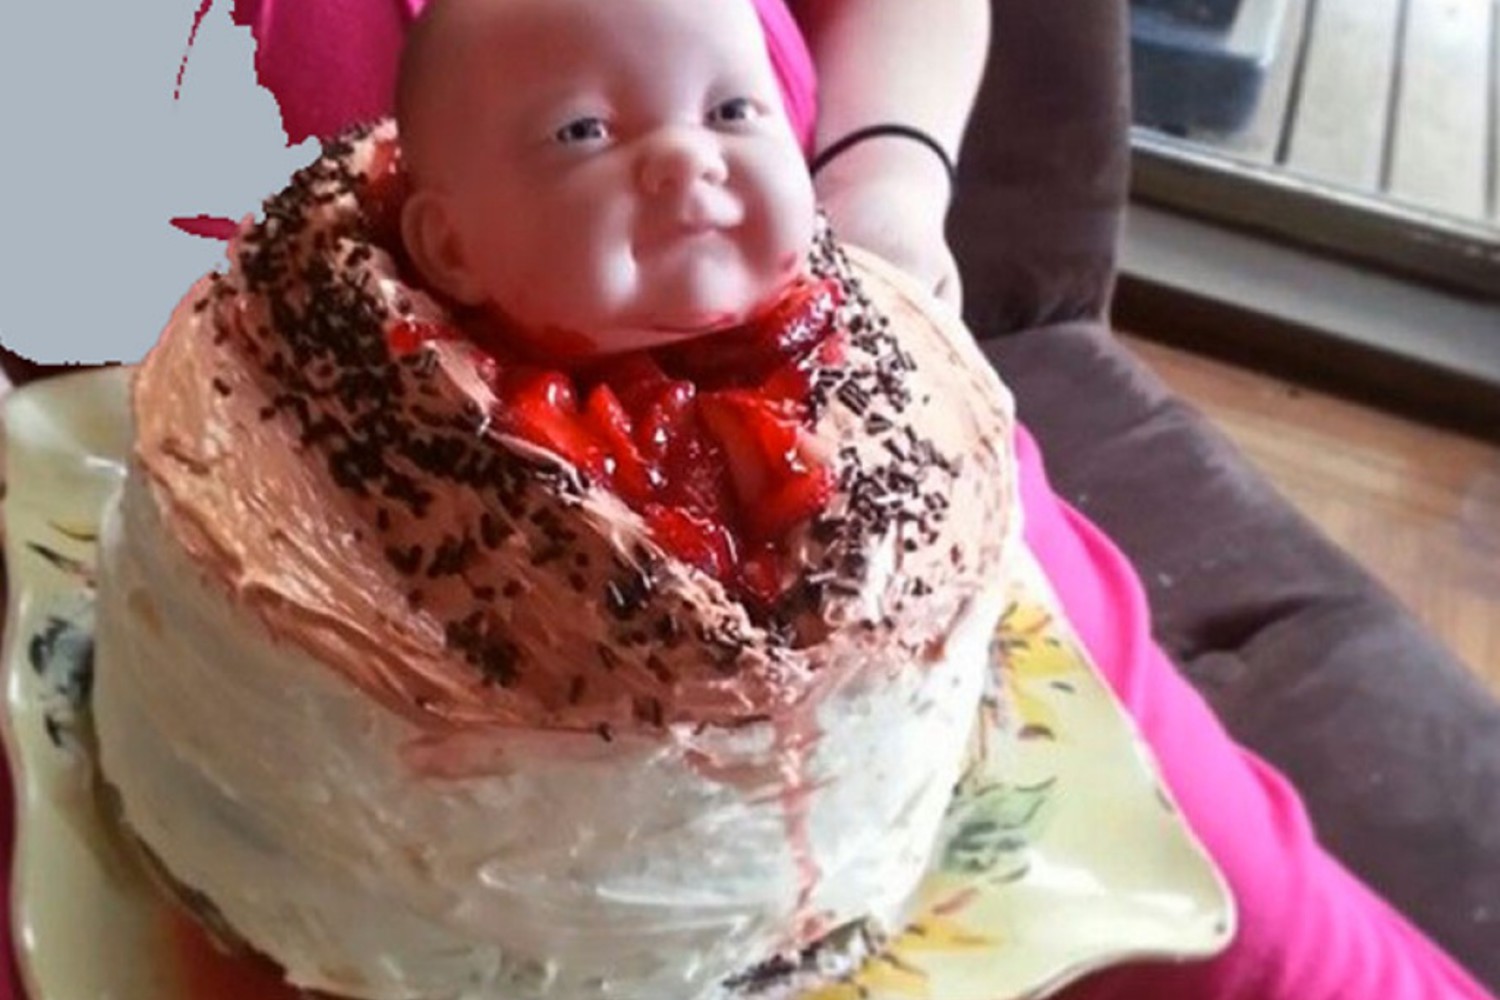 Cake Wrecks - Home - The Search for the World's Most Disturbing Shower Cake  ENDS HERE